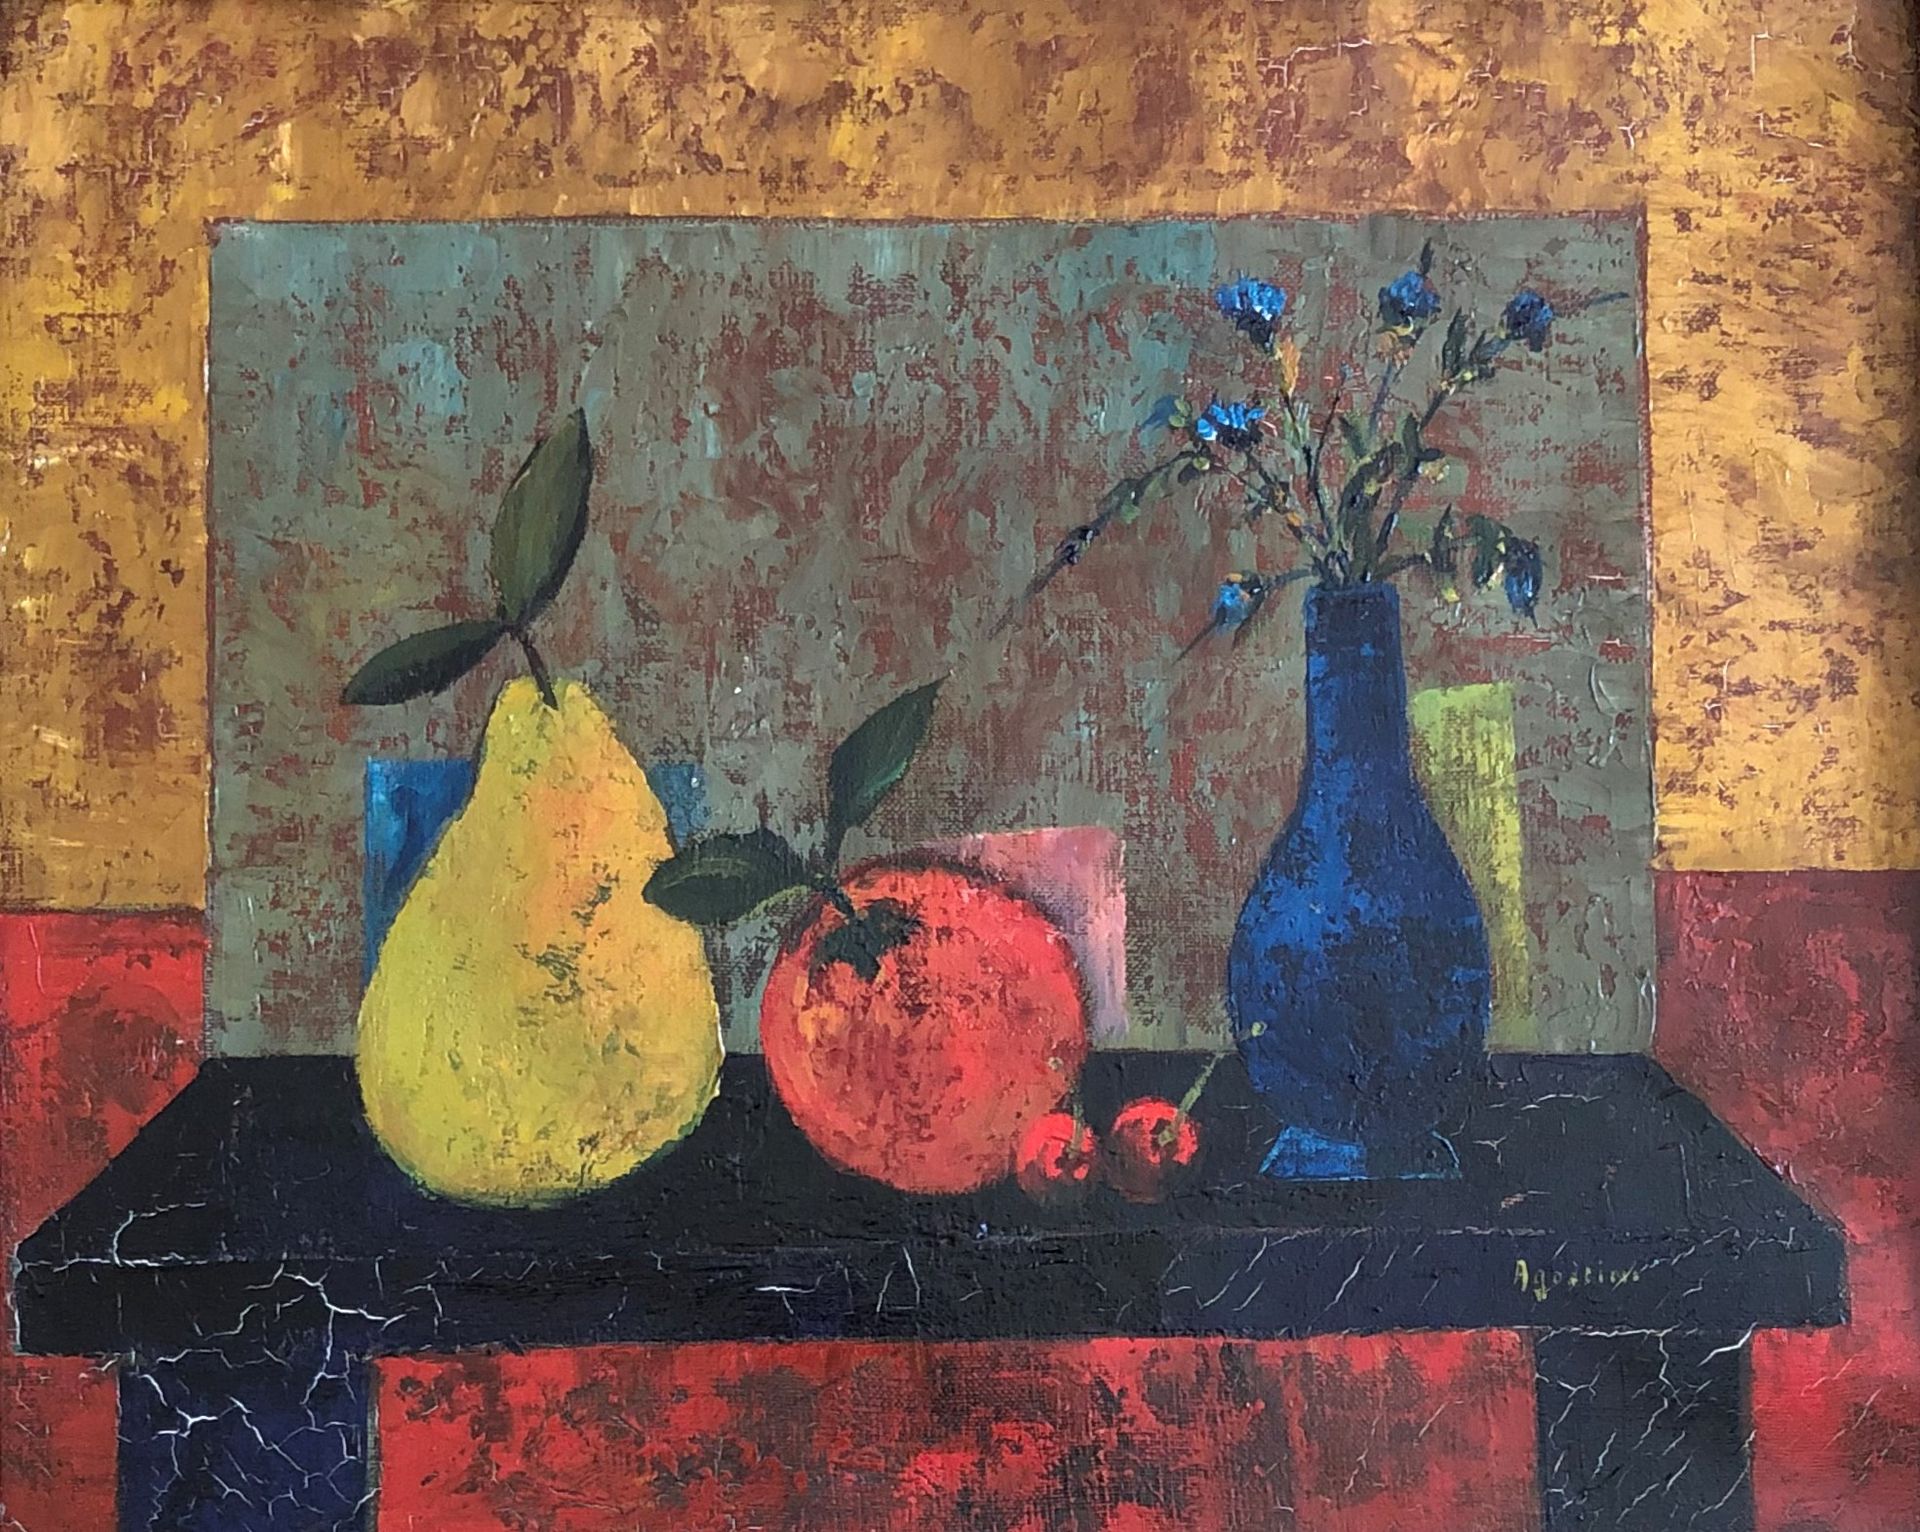 Null Tony AGOSTINI (1916-1990)

Still life with fruits and a blue vase

Oil on c&hellip;